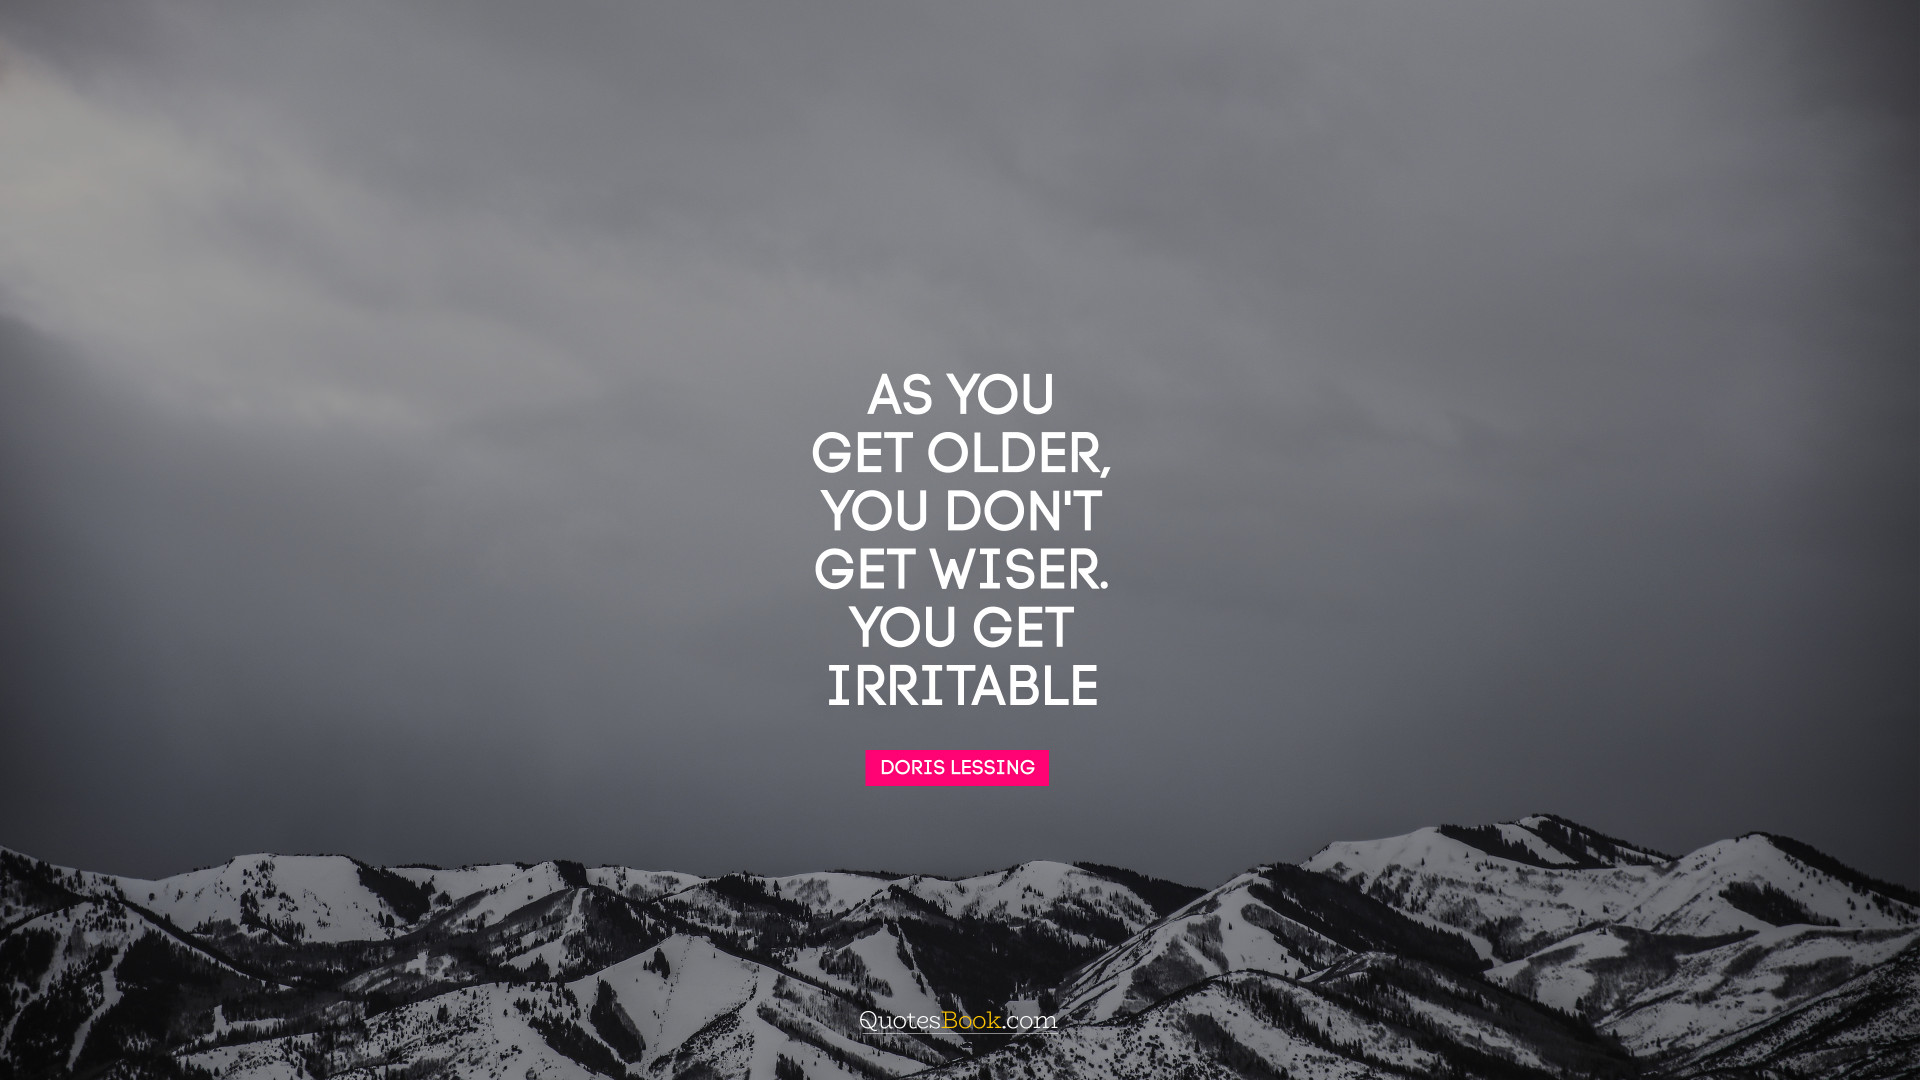 As you get older, you don't get wiser you get irritable. - Quote by